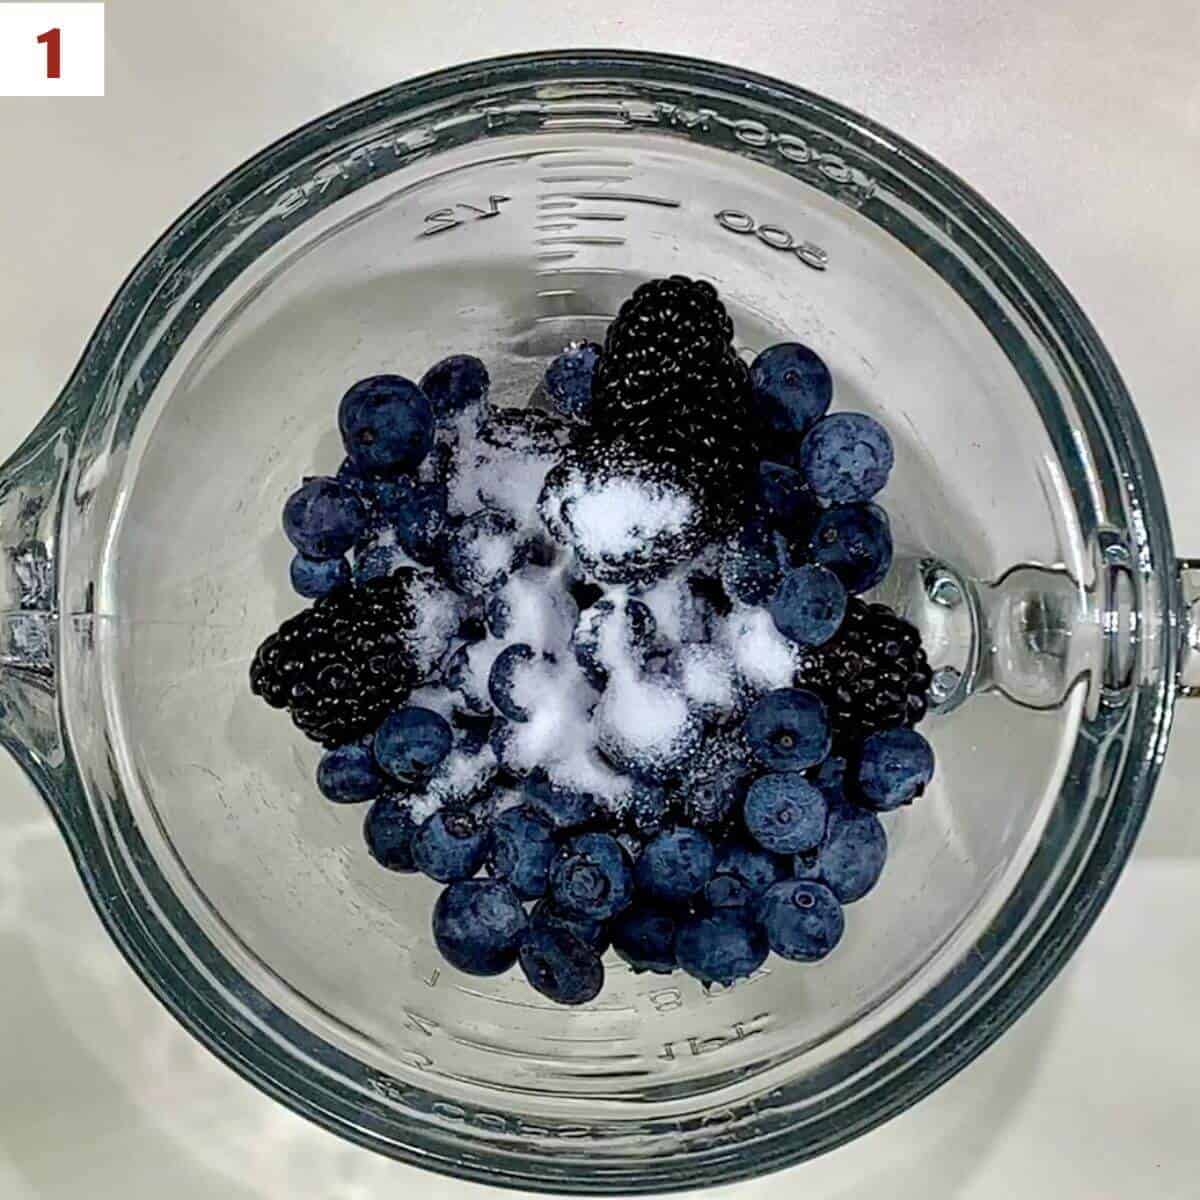 Blueberries & blackberries with sugar in a glass bowl from overhead.